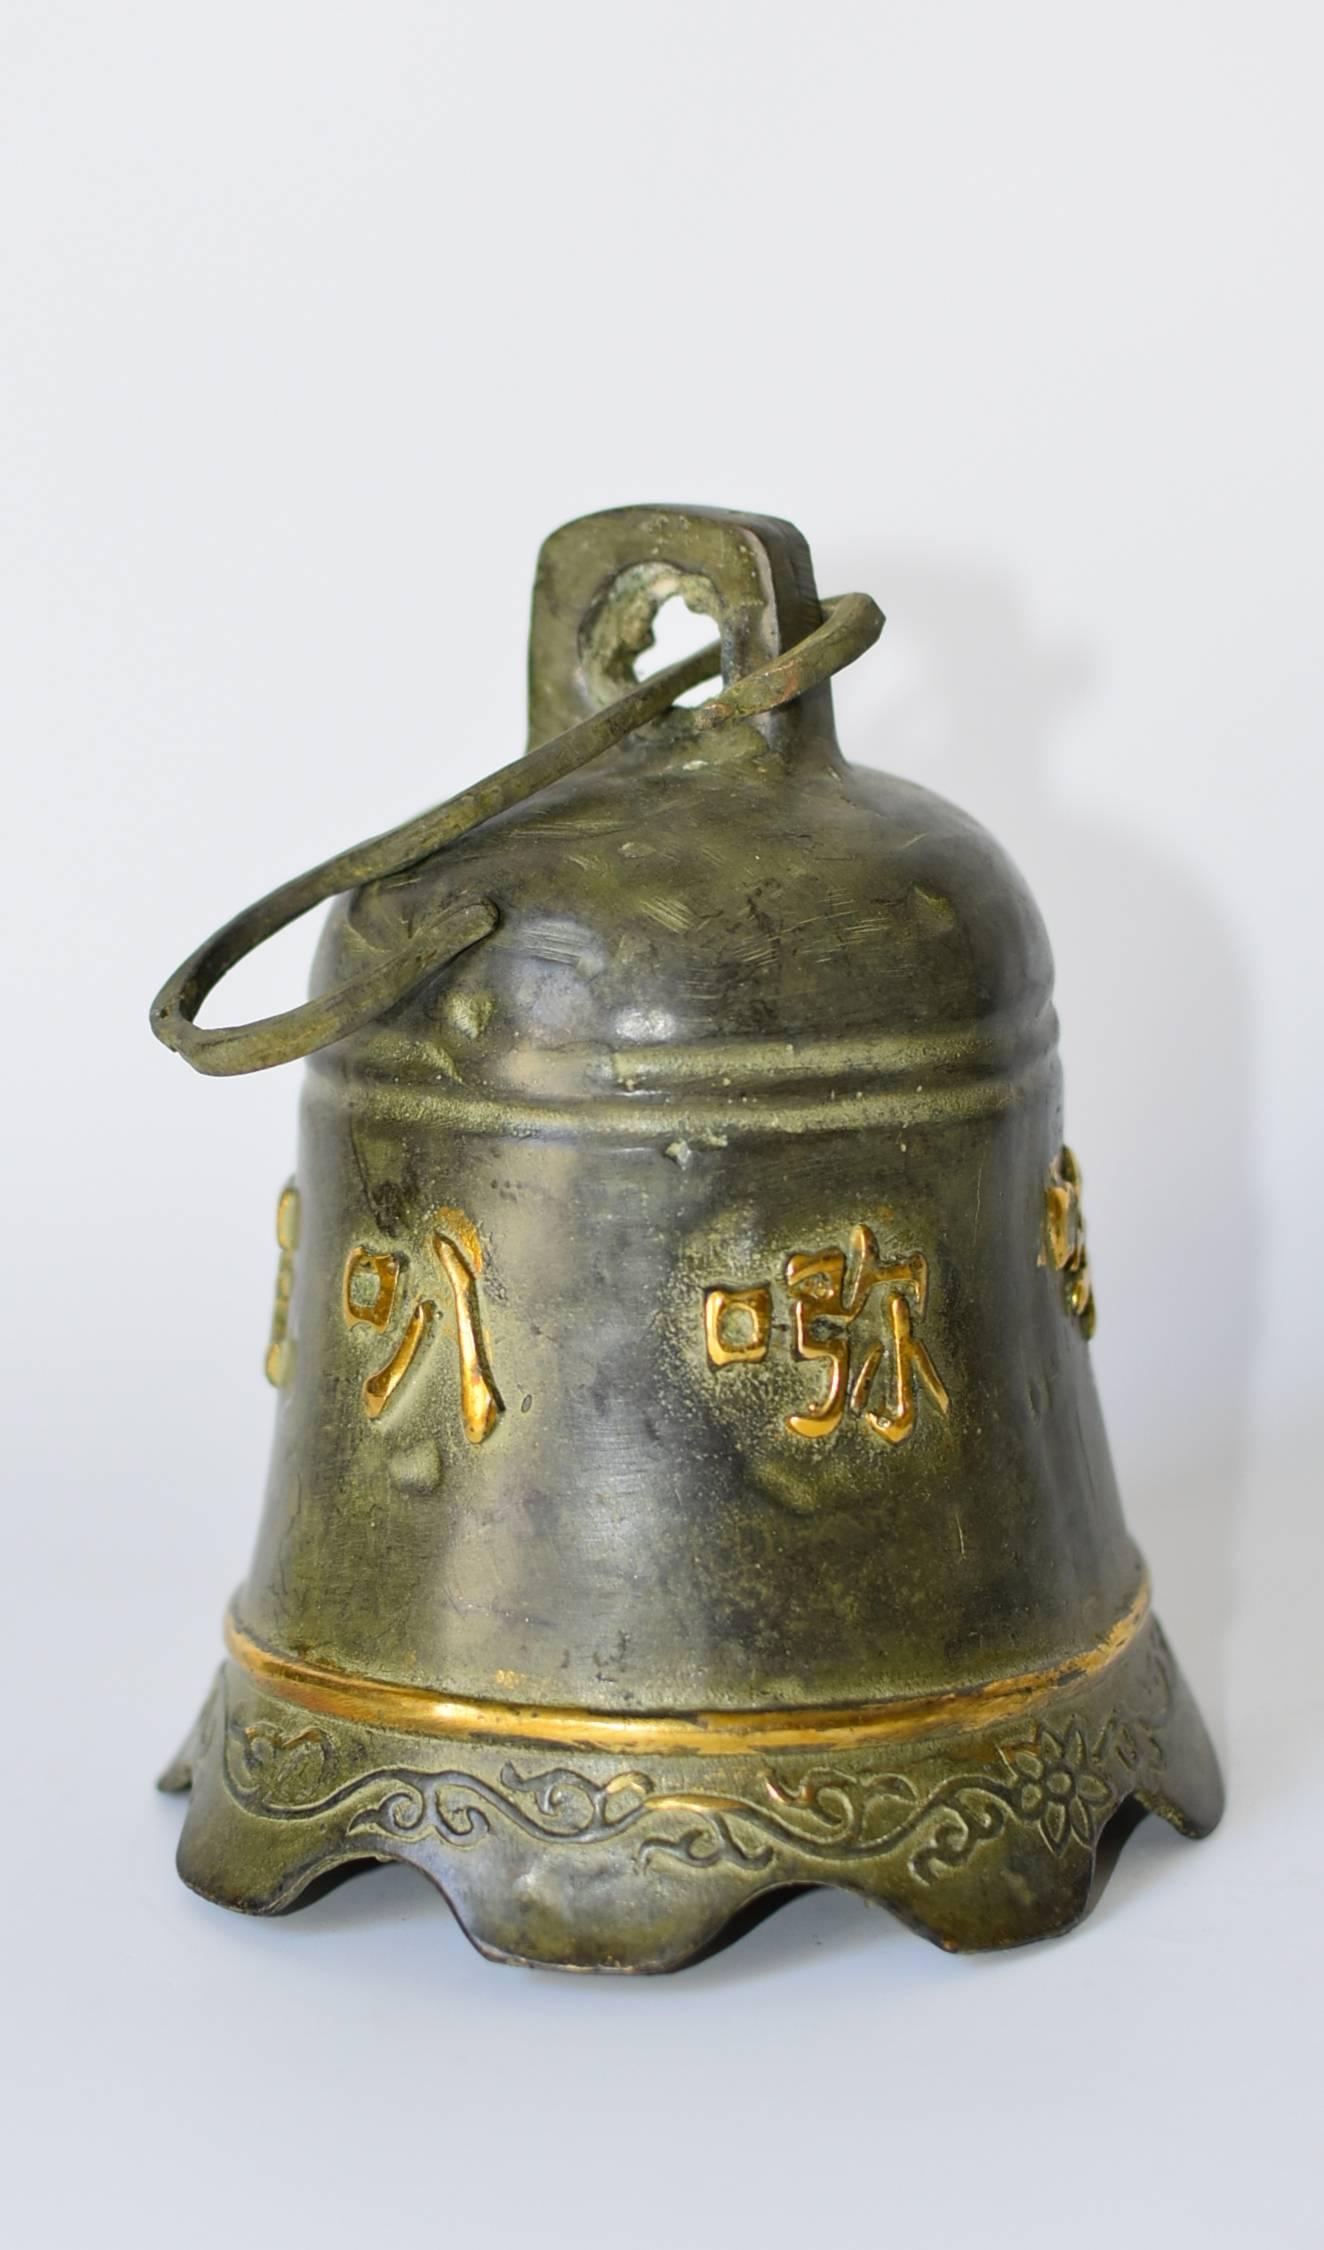 Beautiful temple bells engraved with the Buddhist chanting of 